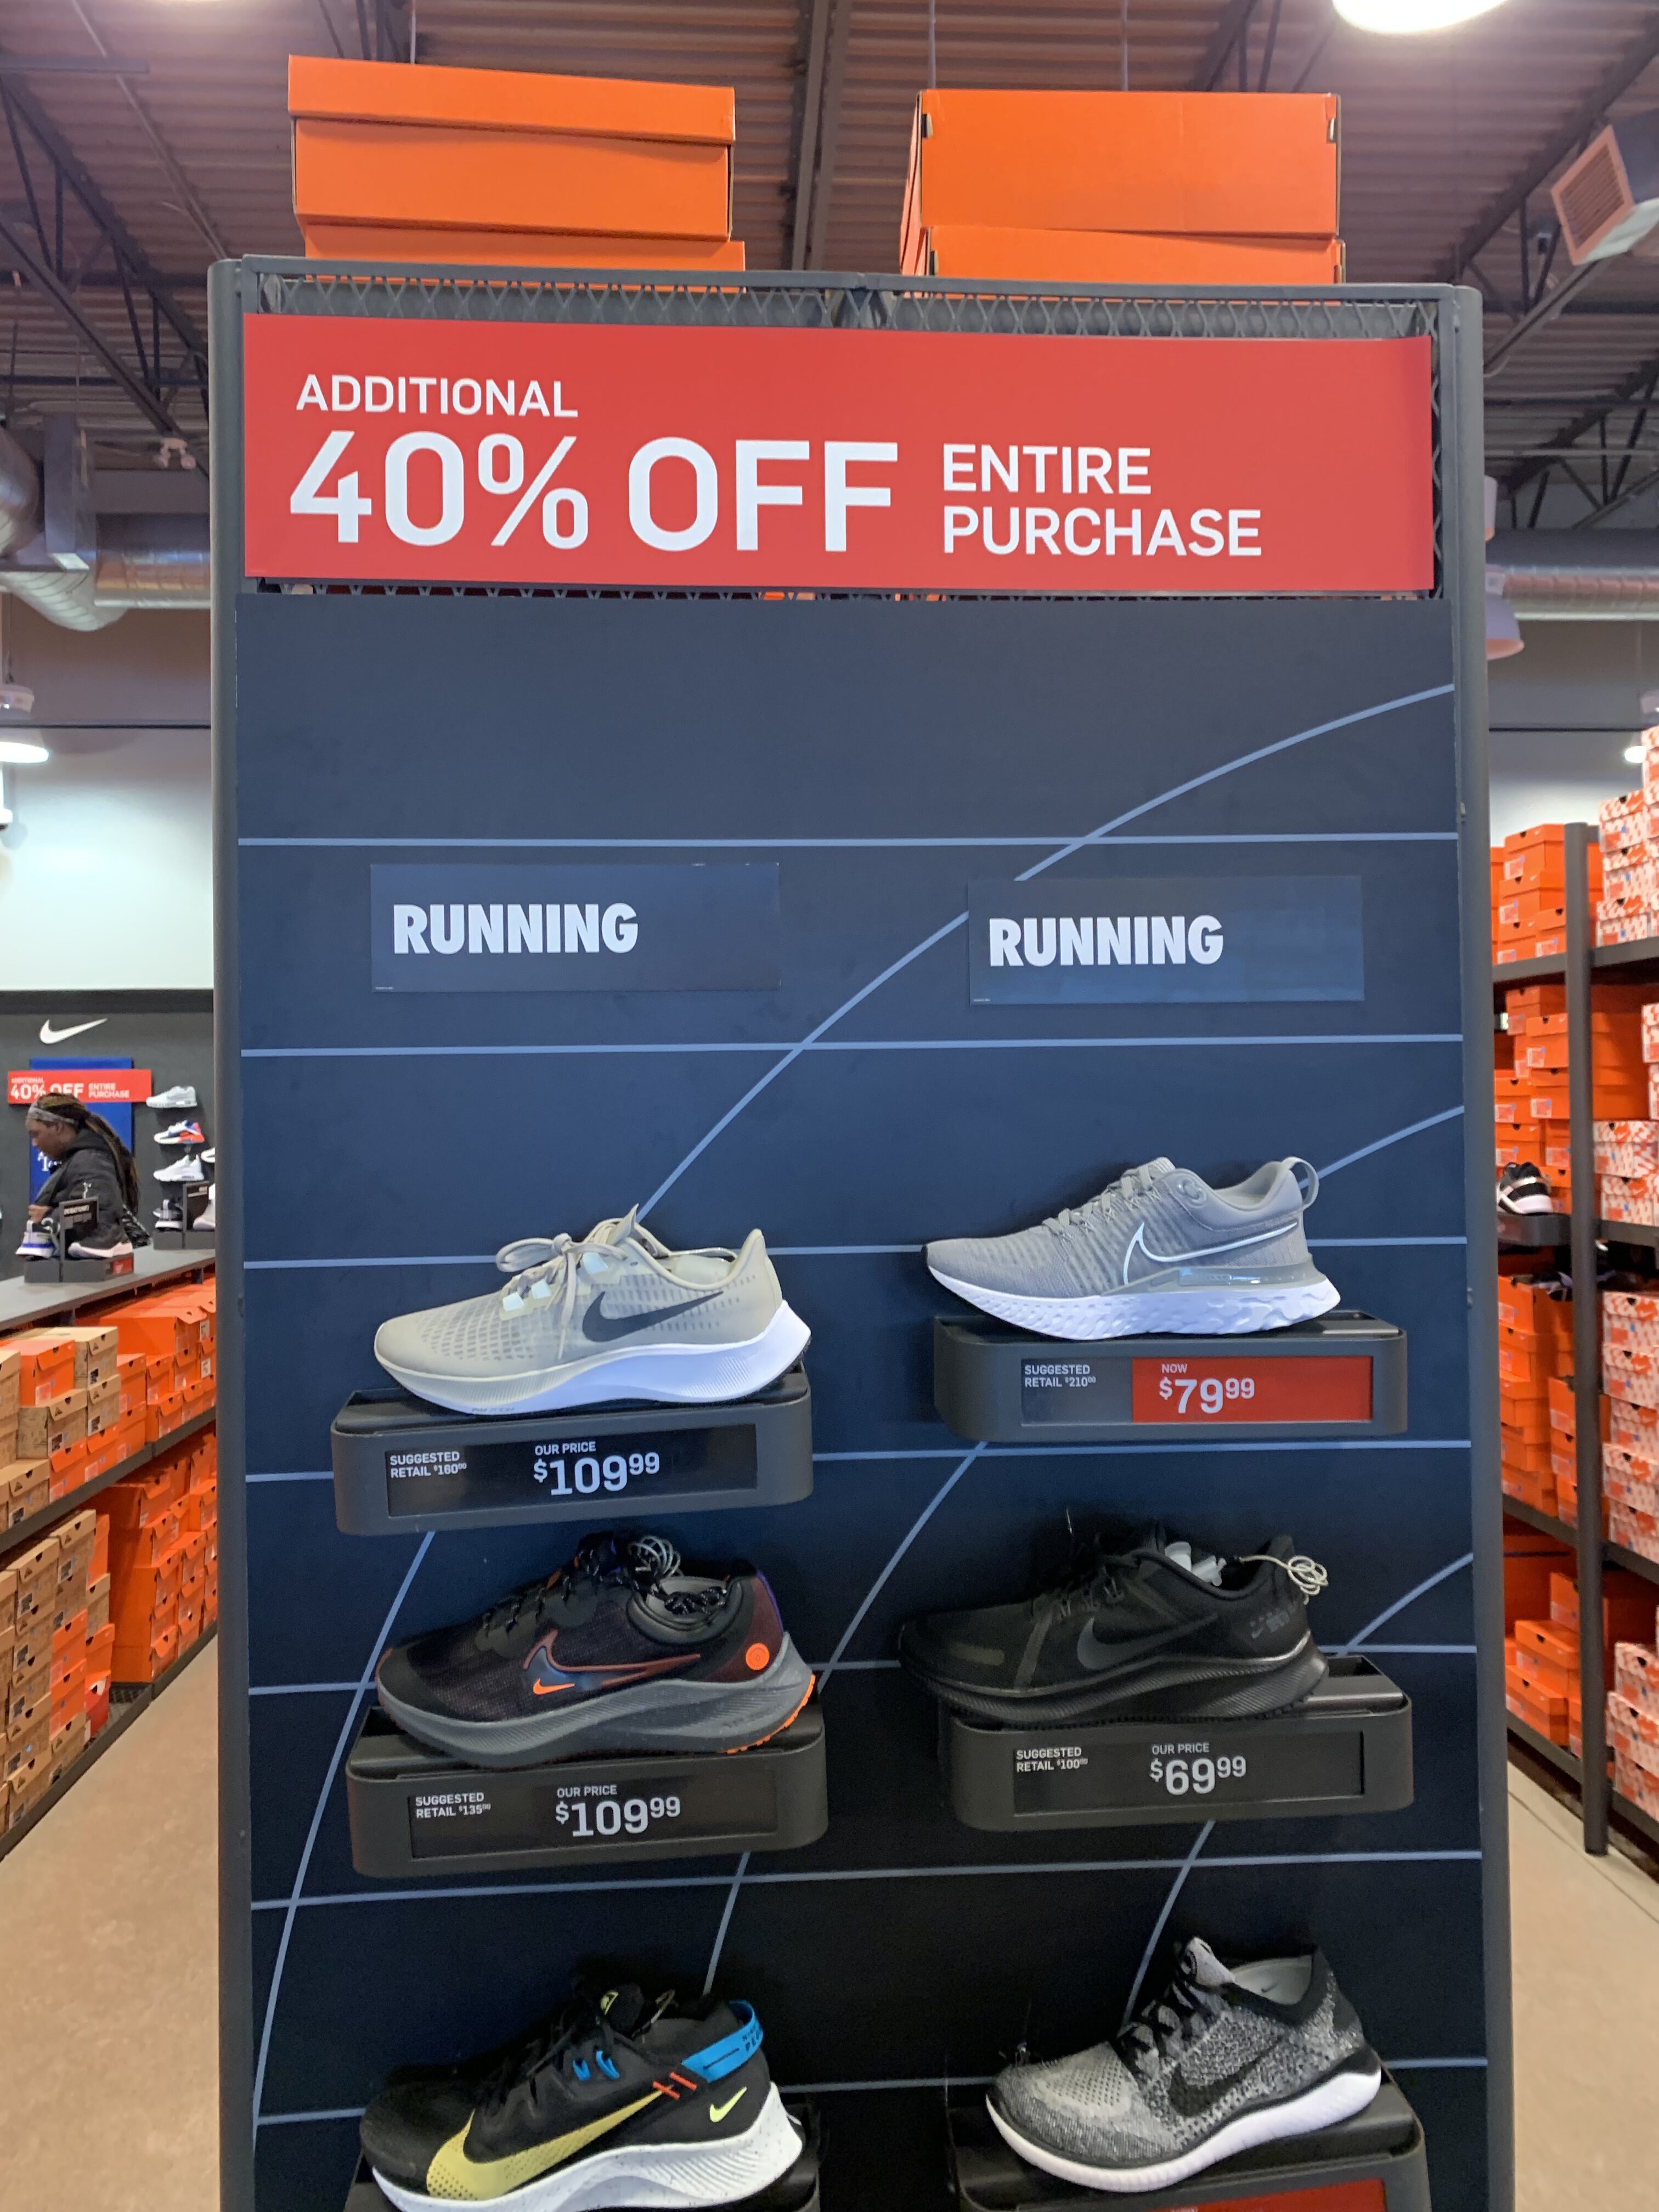 Nike] Nike Factory Outlet off entire - RedFlagDeals.com Forums